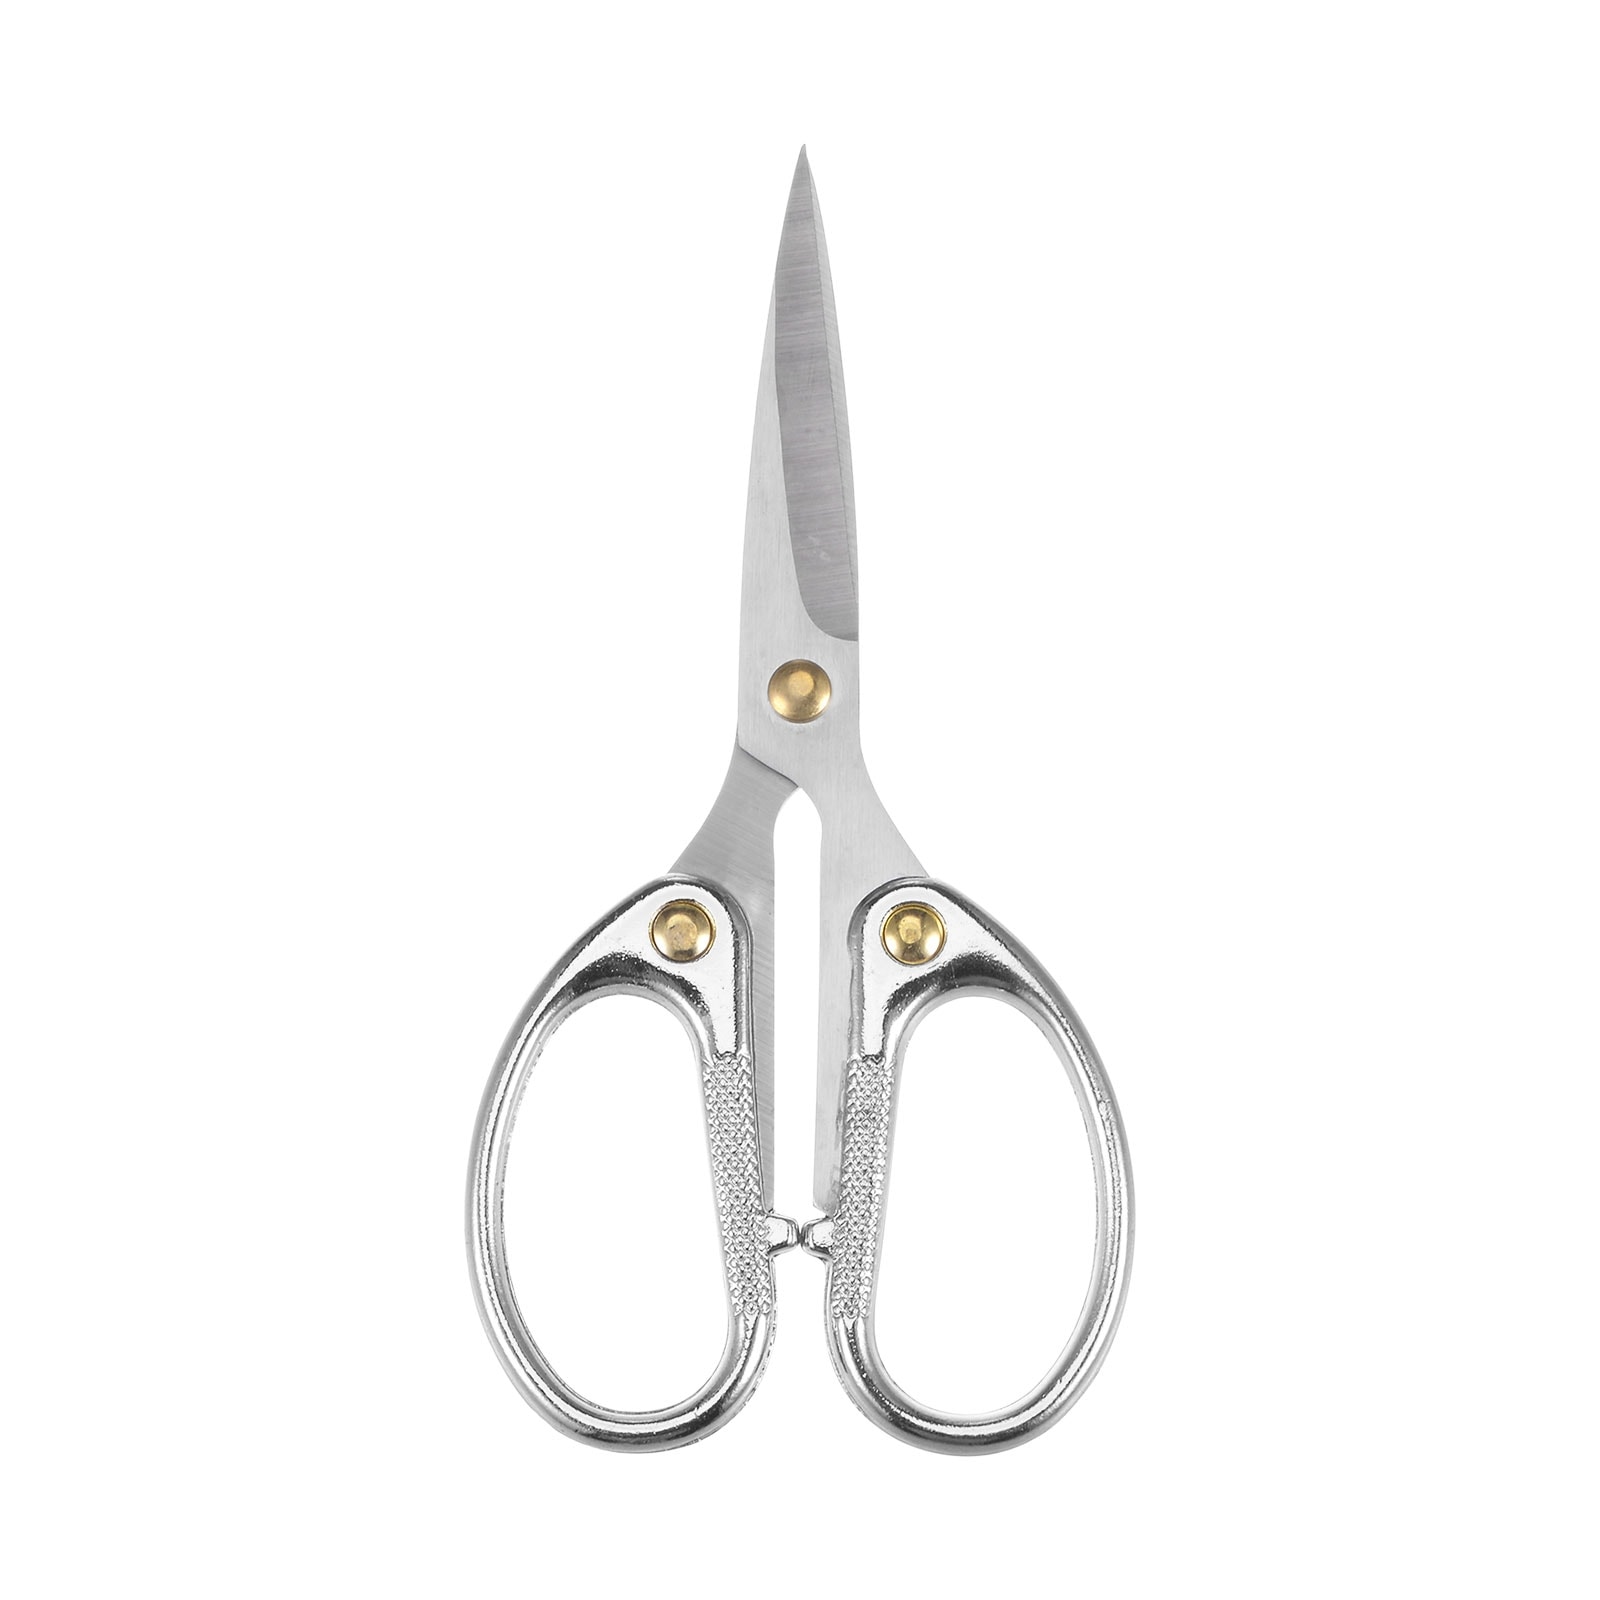 Vintage Sewing Scissors,stainless Steel Sharp Tip Embroidery